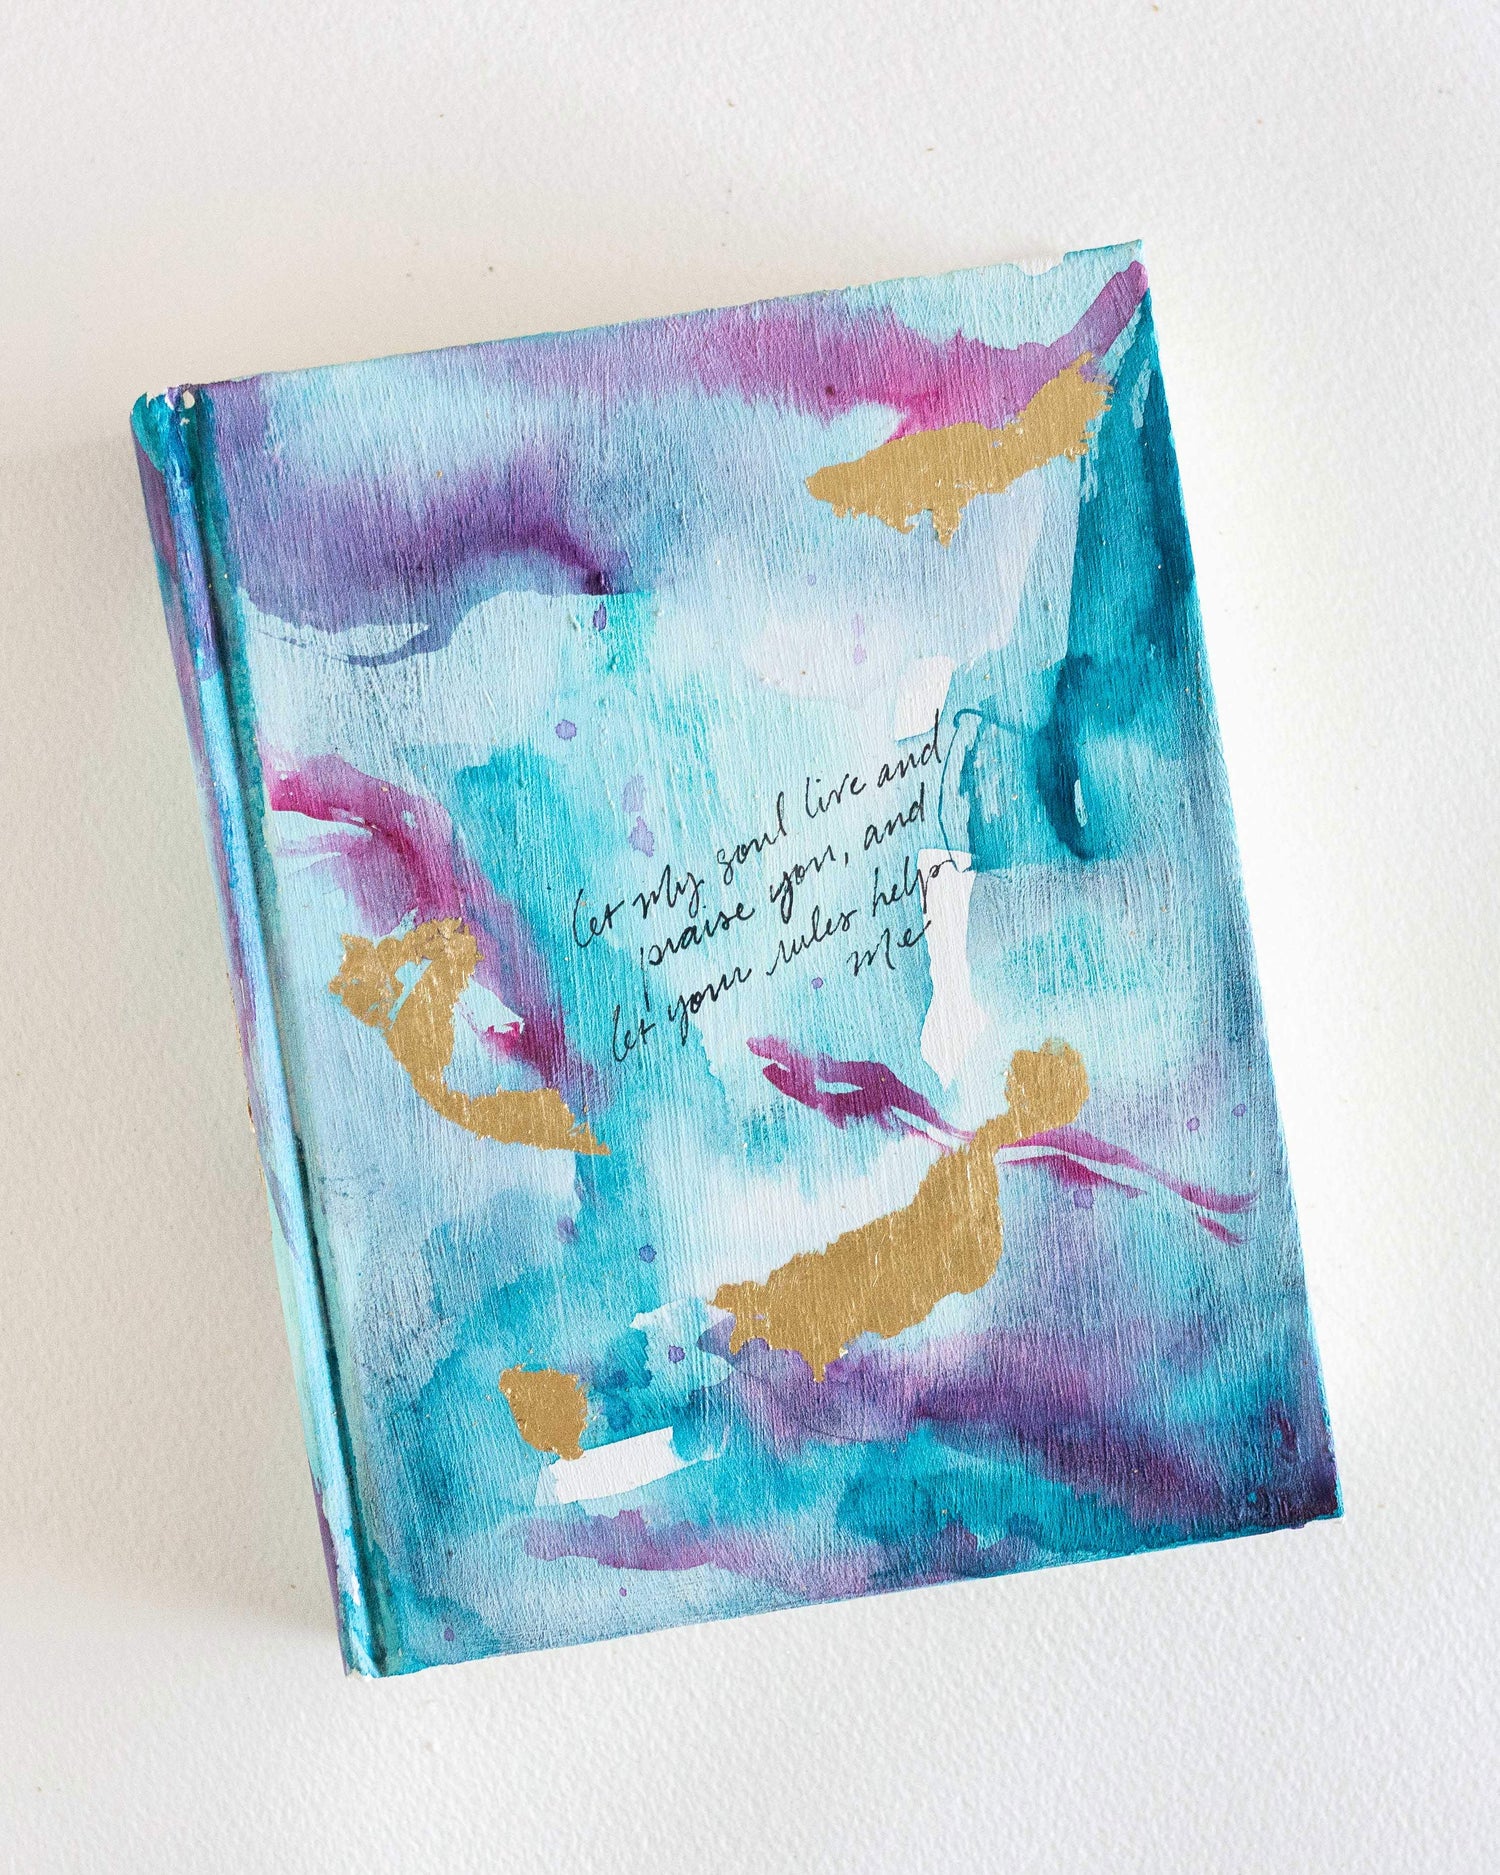 Psalm 119:175, “Let My Soul Live That It Might Praise You” Hand-painted Watercolor Bible